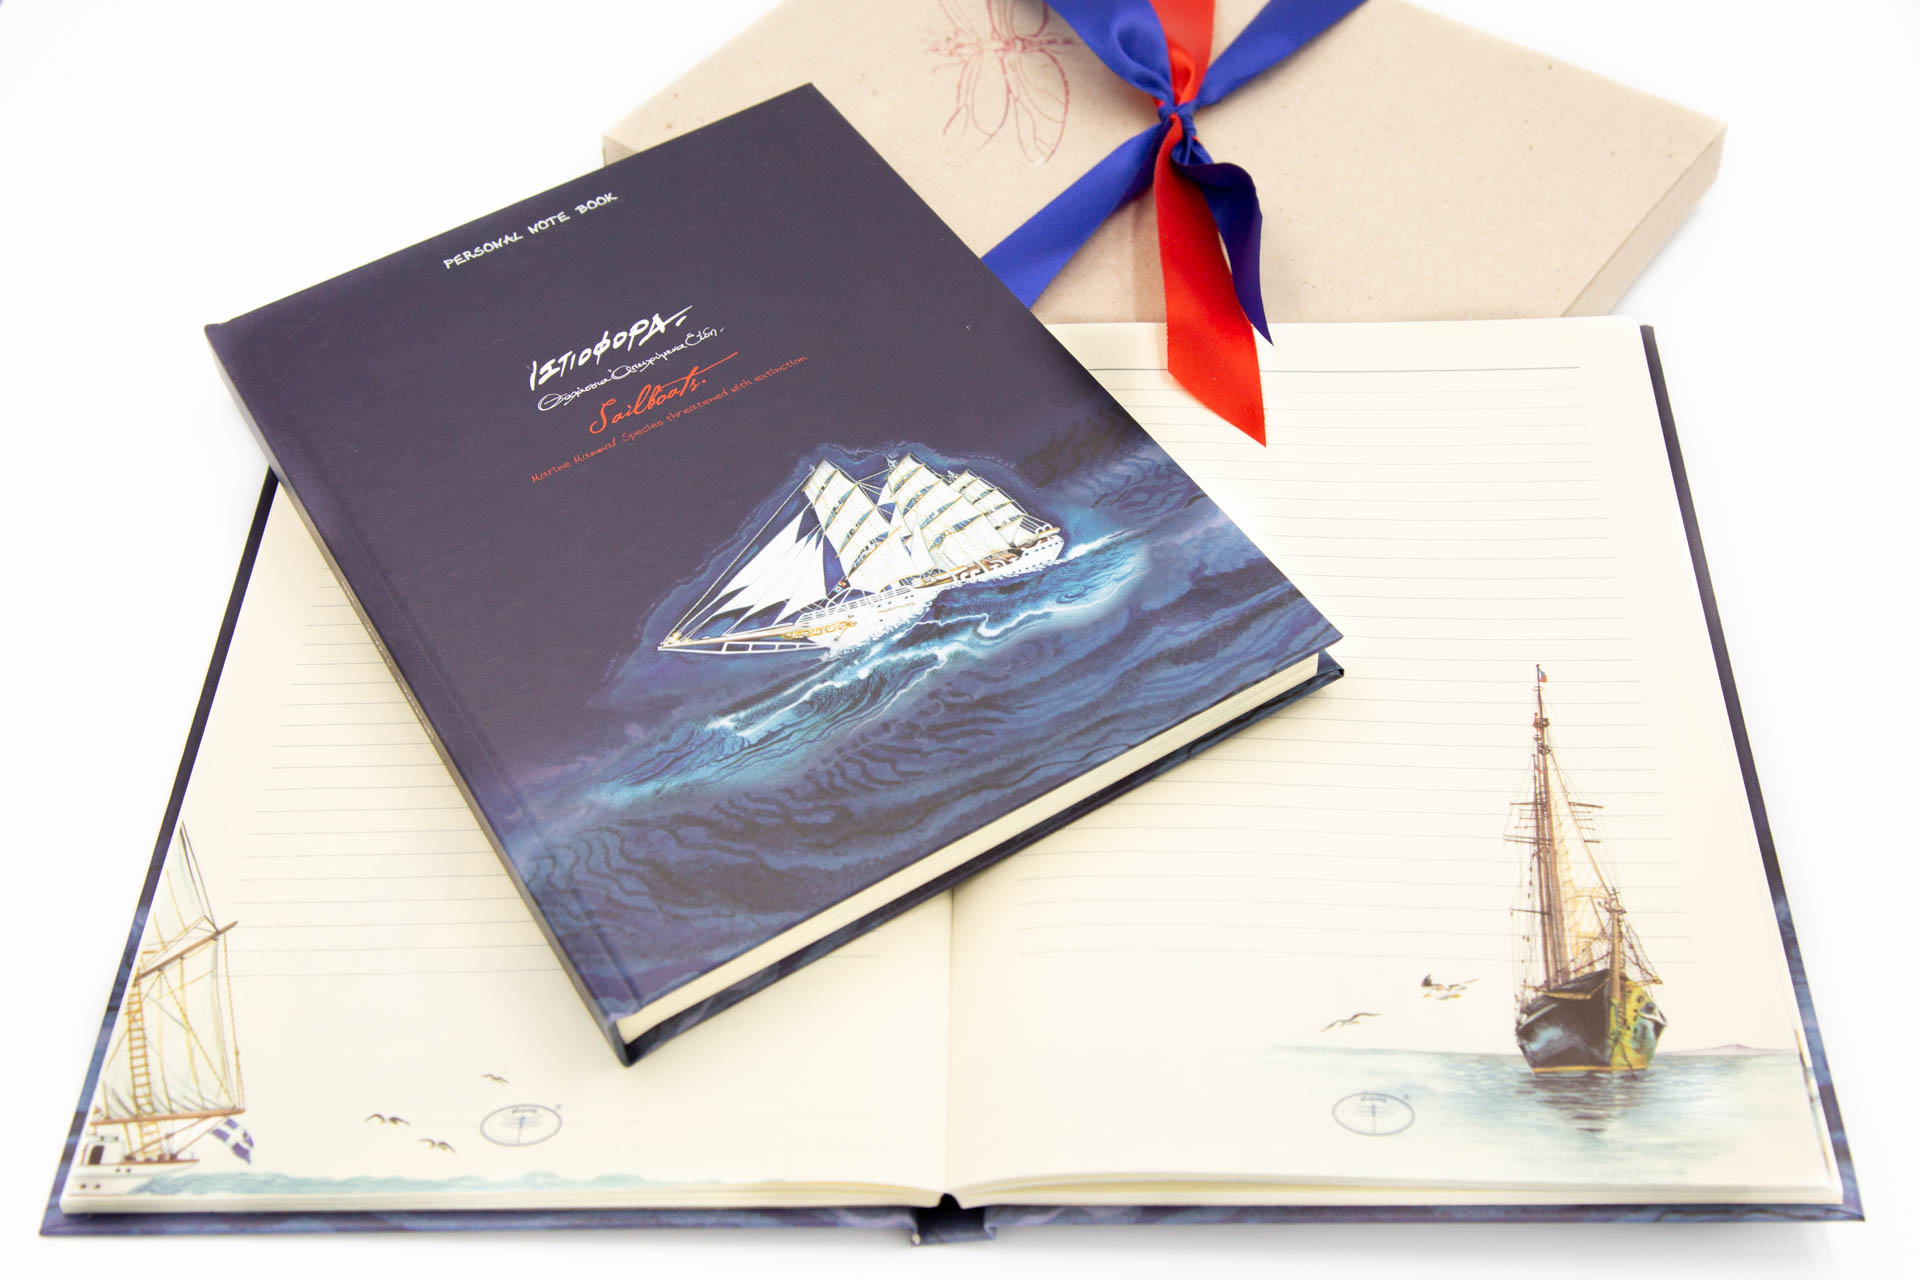 Personal notebook "Sailboats" - Front, Package and Spread